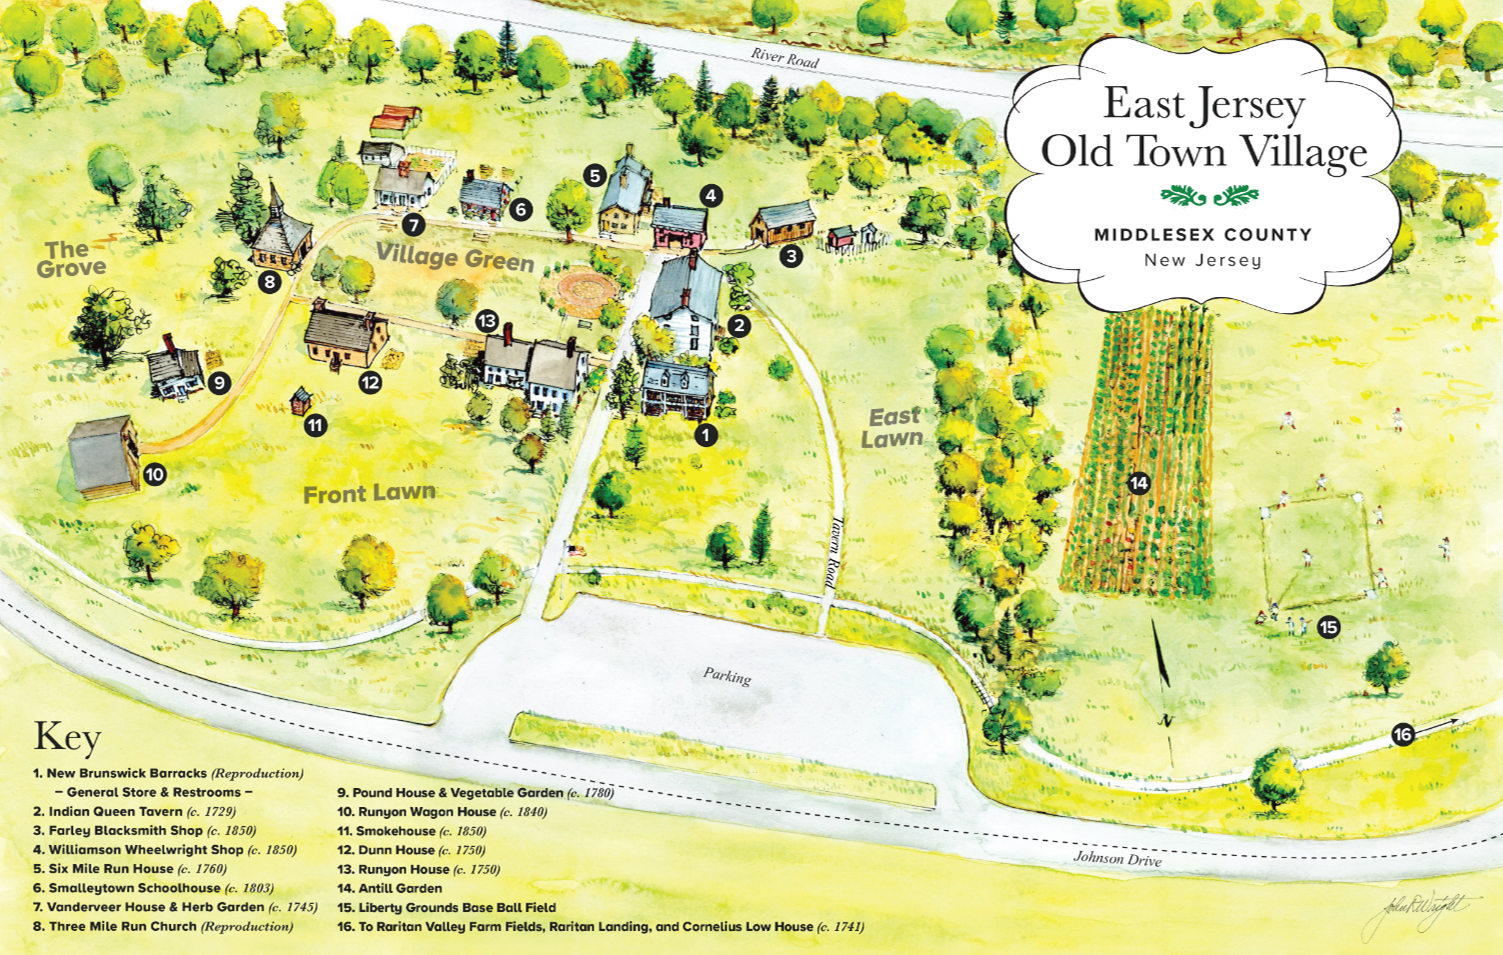 East Jersey Old Town Village - Crossroads of the American Revolution